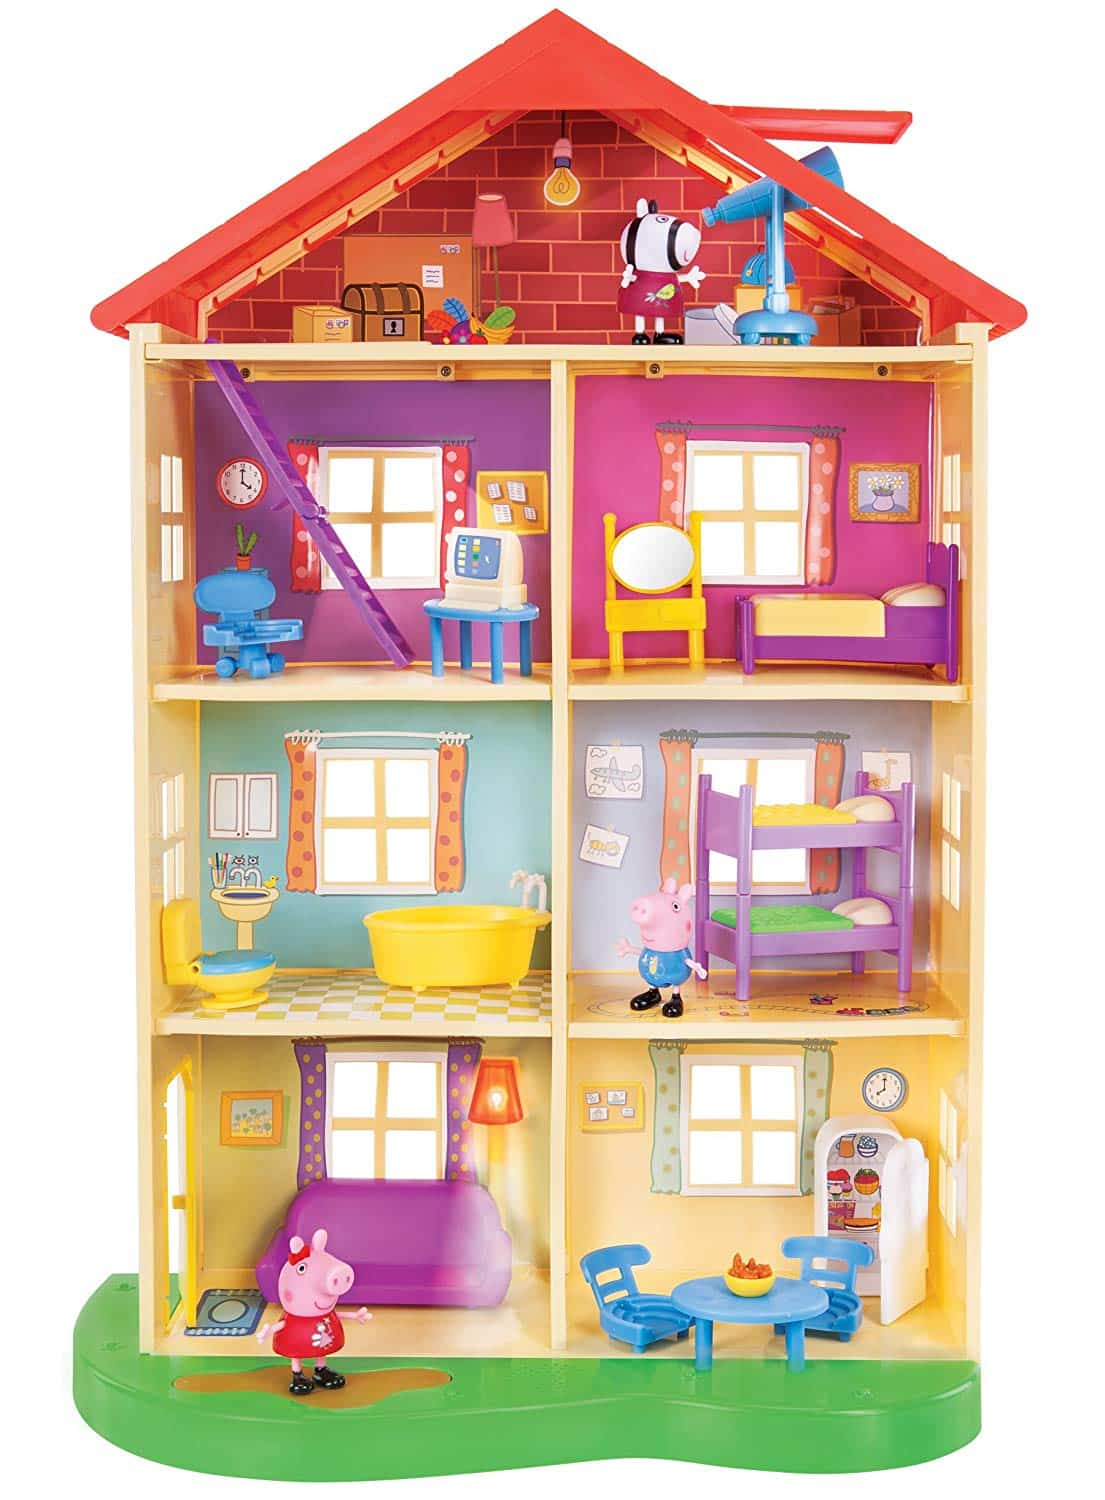 New Peppa Pig Toys & Gifts 2022: Official Doll House 2022